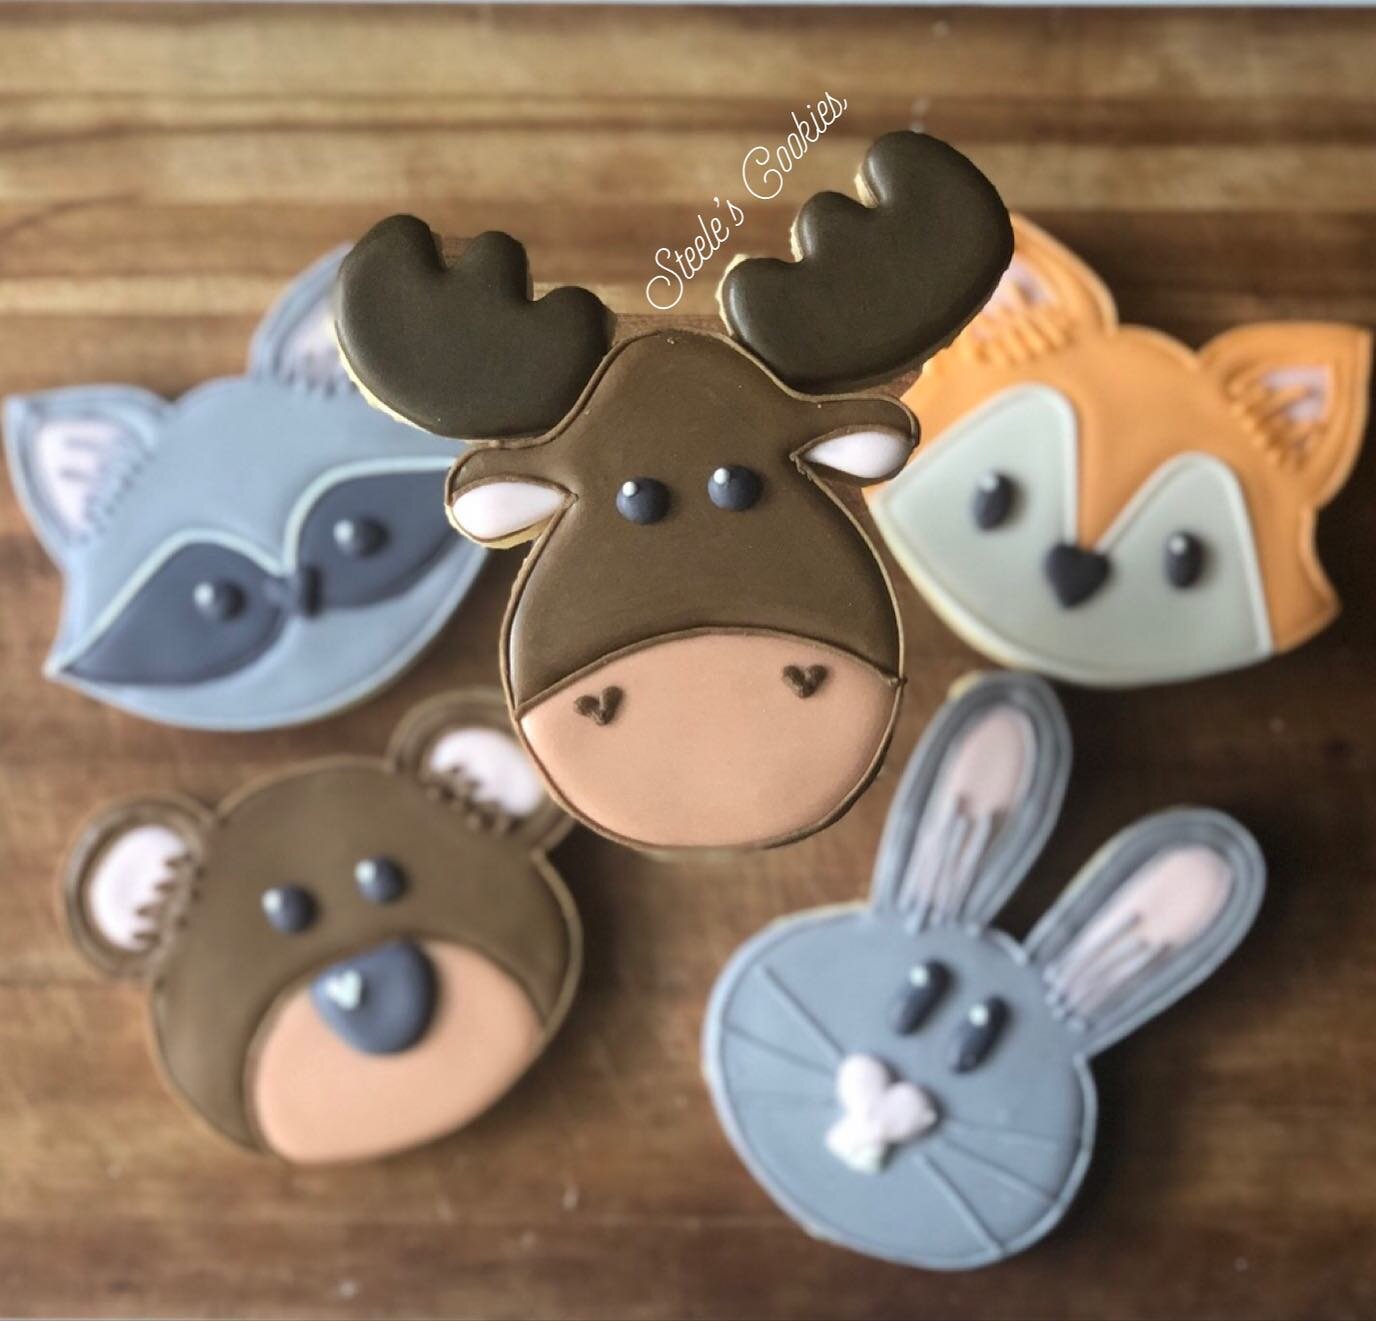 Another woodland set and a new woodland friend added to the mix. The moose may be my new favorite, what&rsquo;s yours? 
.
#woodlandcreatures #woodlandfriends #babyshowercookies #cookiesofinstagram